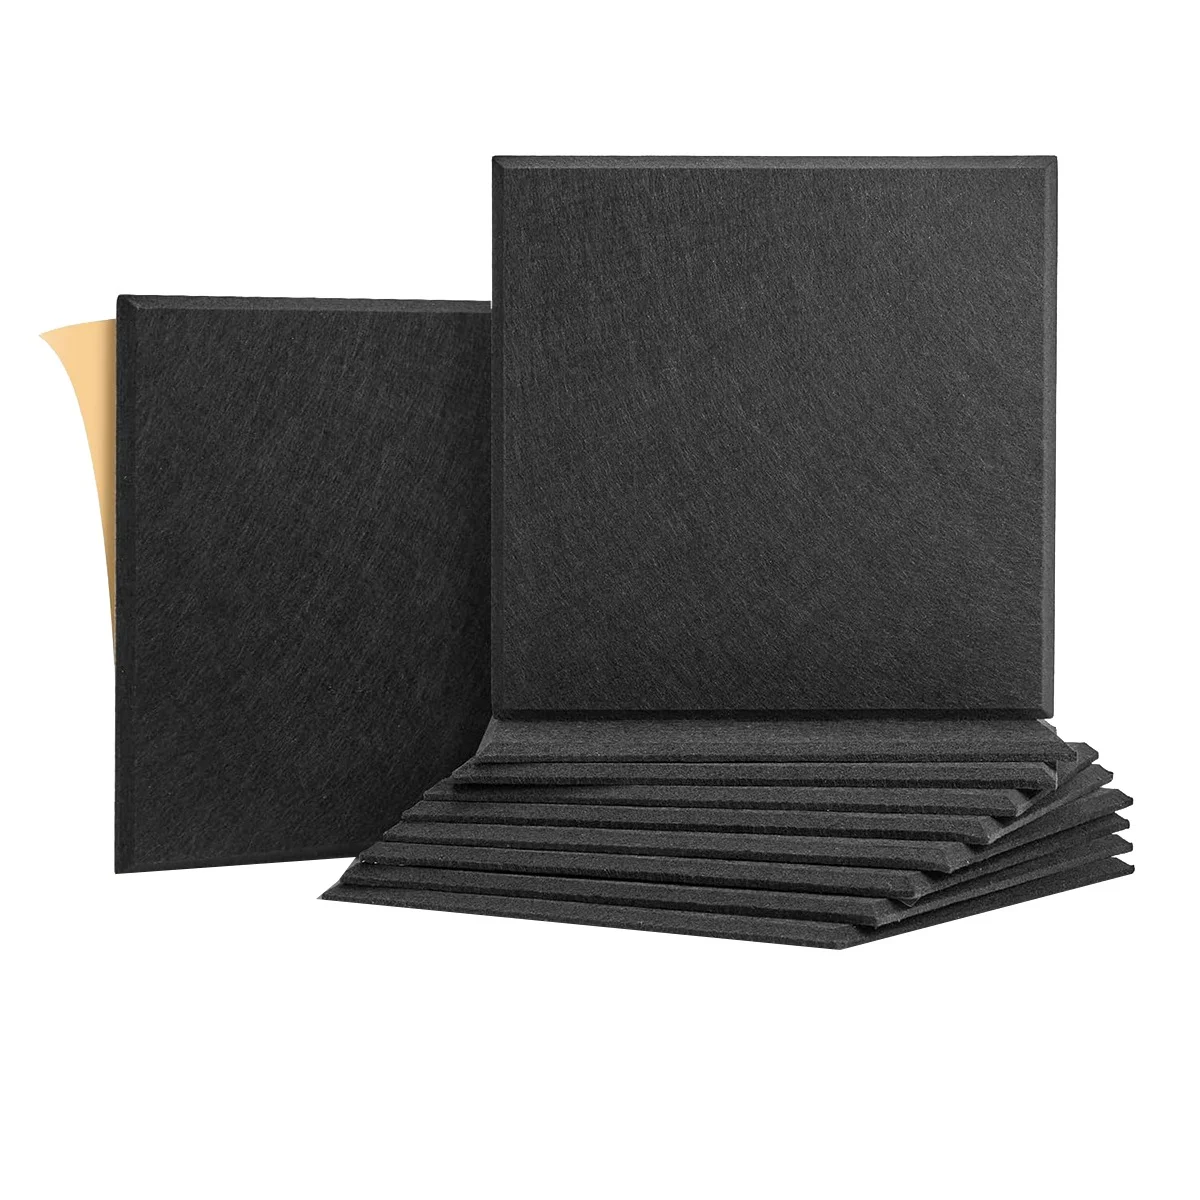 

10Pack Sound Proof Panels for Walls,Self-Adhesive Acoustic Panels 12x12x0.4In for Recording Studio,Office,Home,B